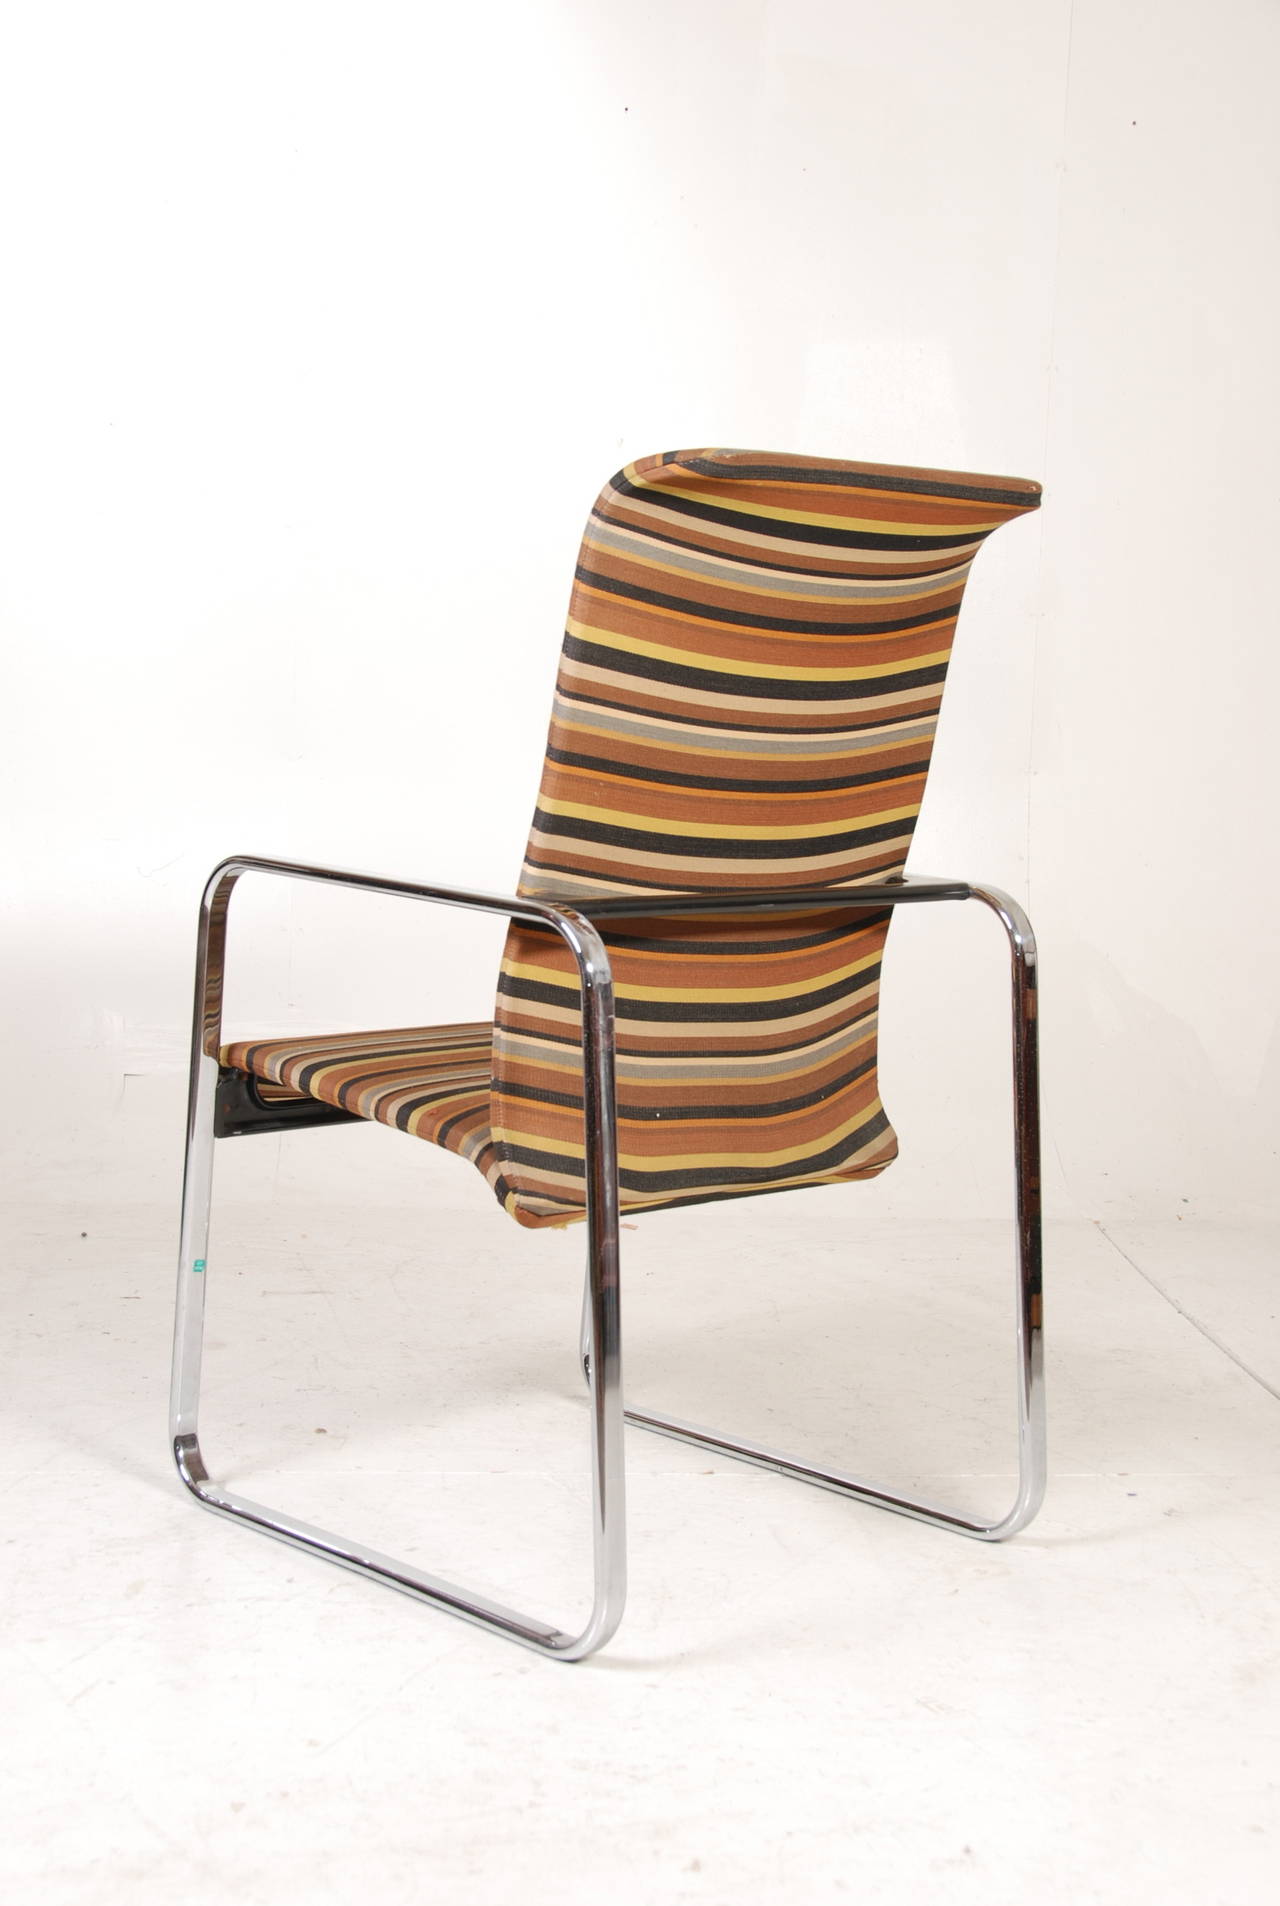 Herman Miller Desk Chair by Peter Protzman with the Original Alexander Girard fabric. The chair is in good condition with moderate wear to the fabric.